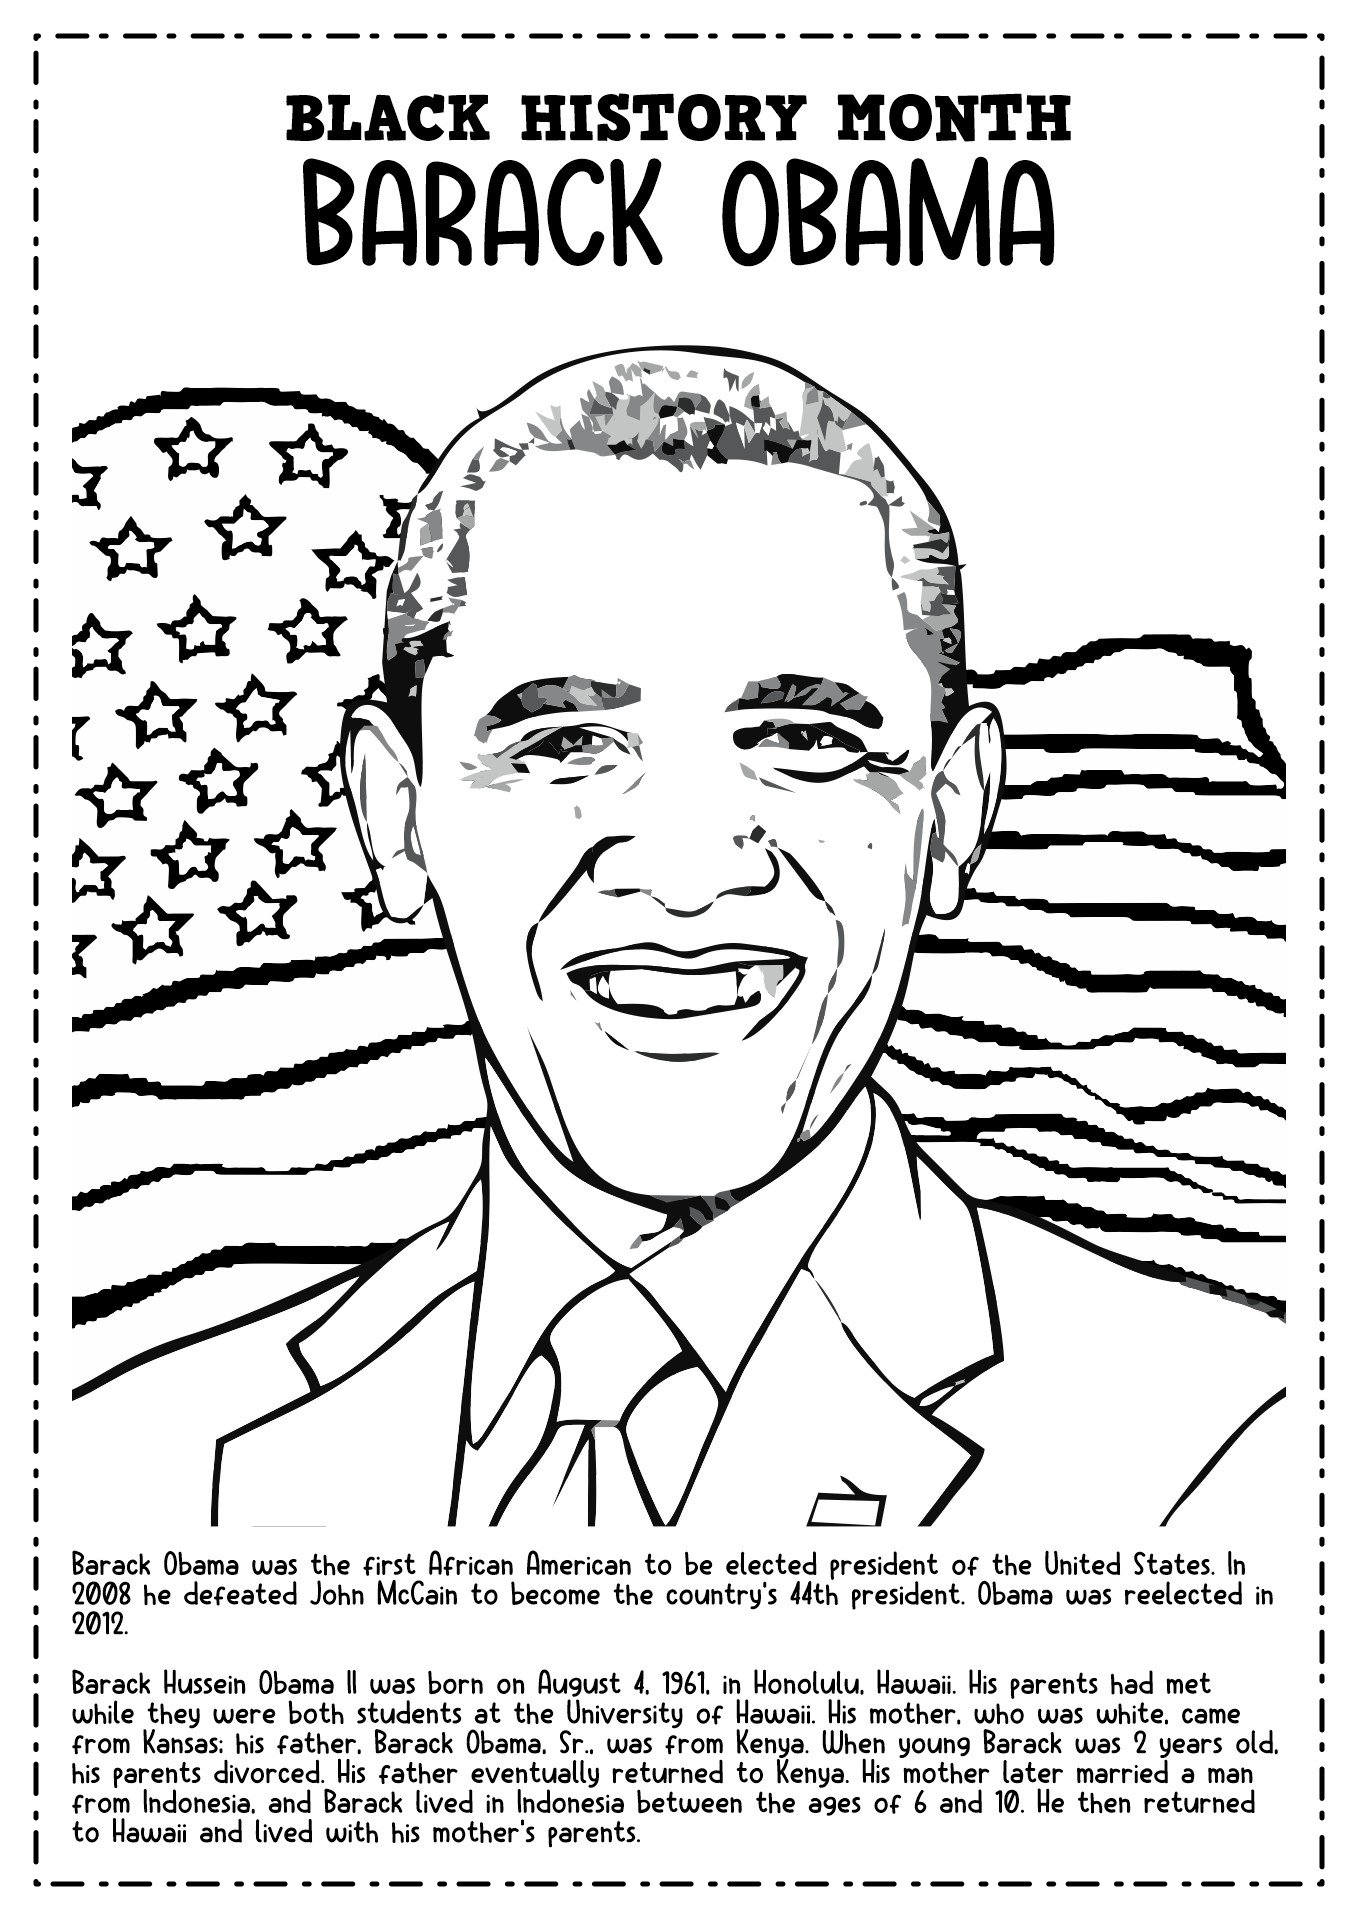 Free Printable Black History Month Coloring Pages Image